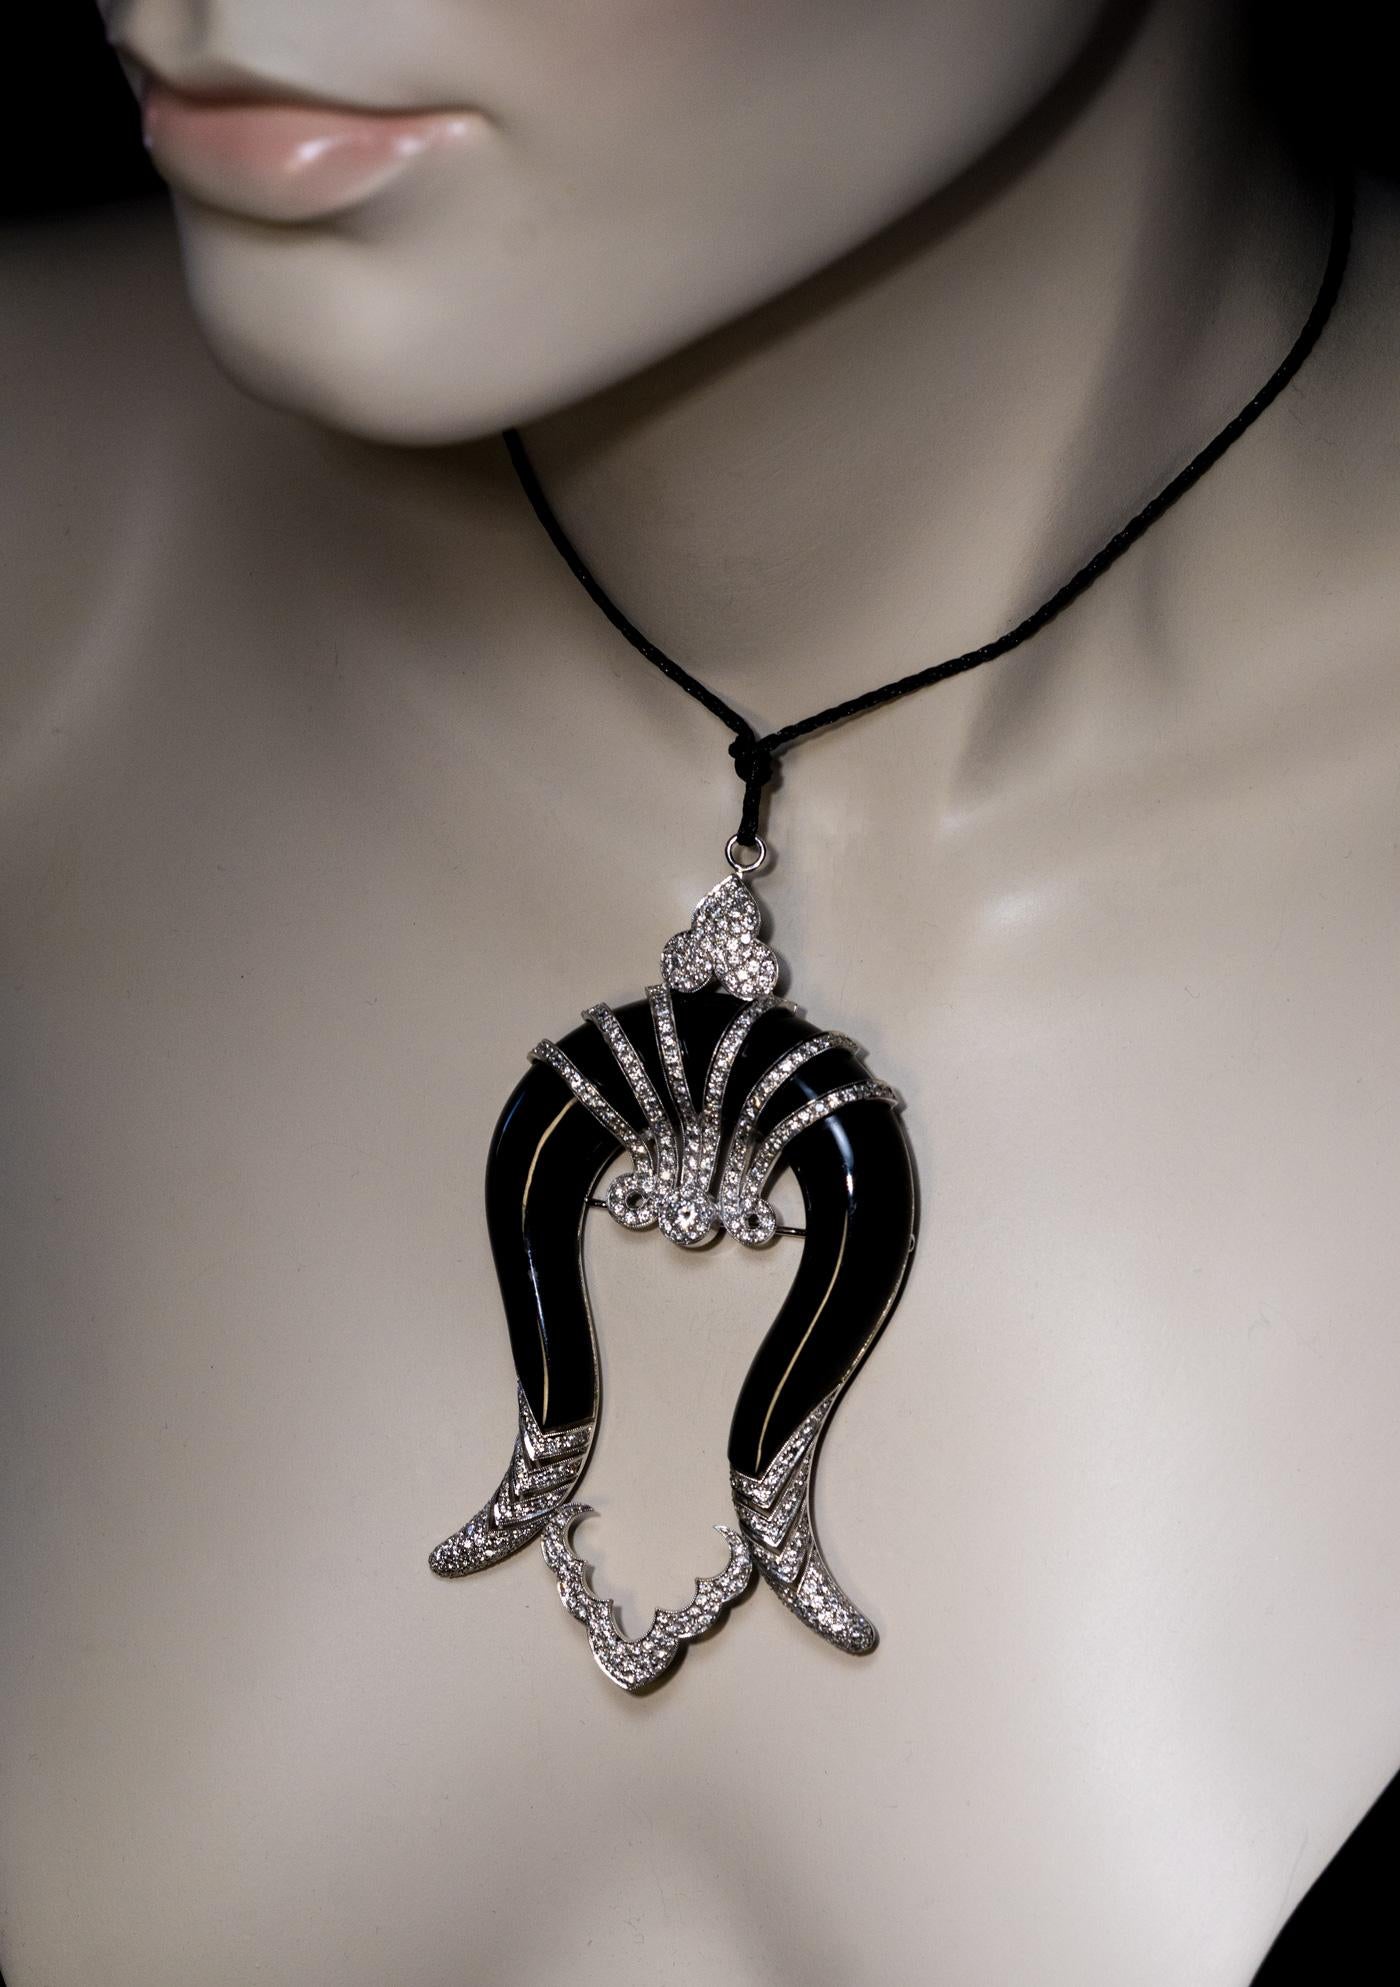 1930s
The pendant / brooch is designed in Art Deco taste as a silhouette of an Egyptian queen. The carved and polished black onyx depicts the hair, and the diamond and white 18K gold embellishments serve as the necklace, crown, and hair